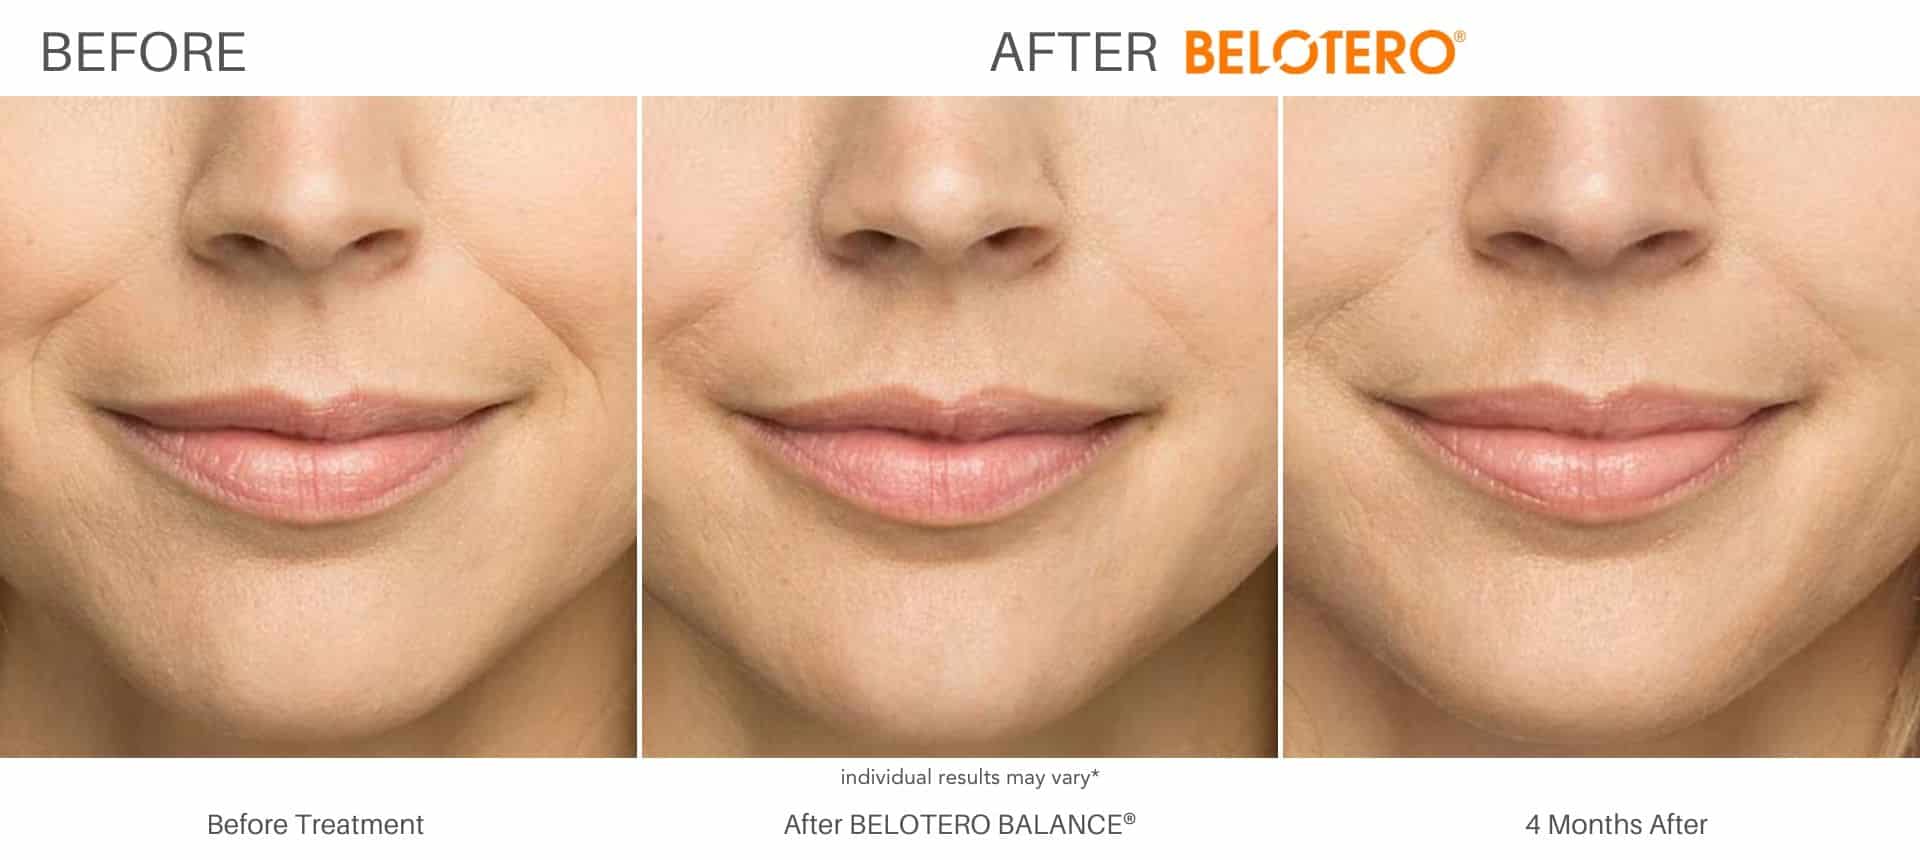 Belotero before and after results in Los Angeles, CA at Sculpt DTLA.